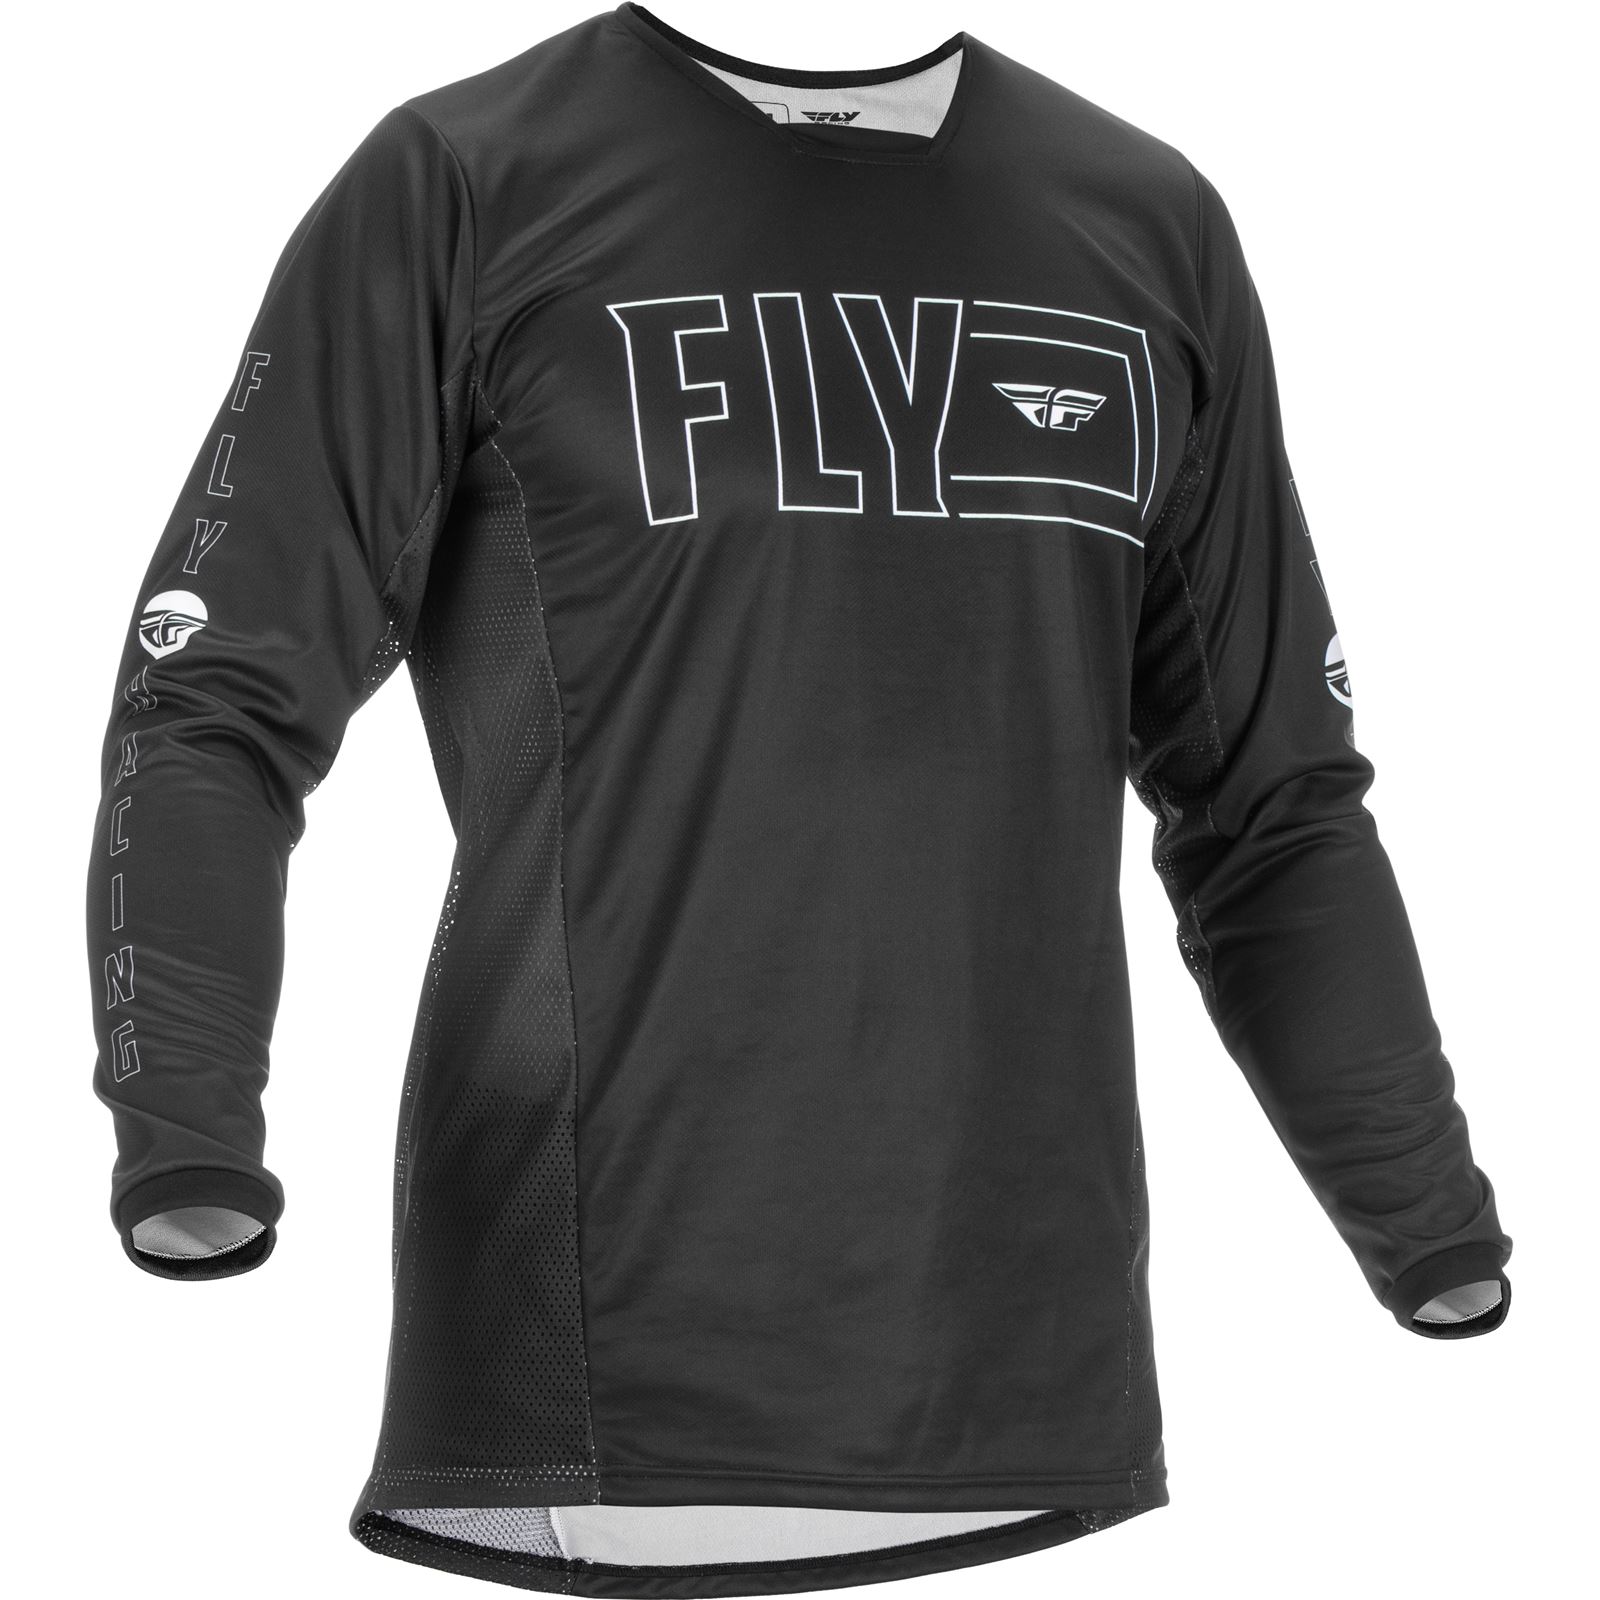 Fly Racing Kinetic Fuel Jersey - Black/White - Small